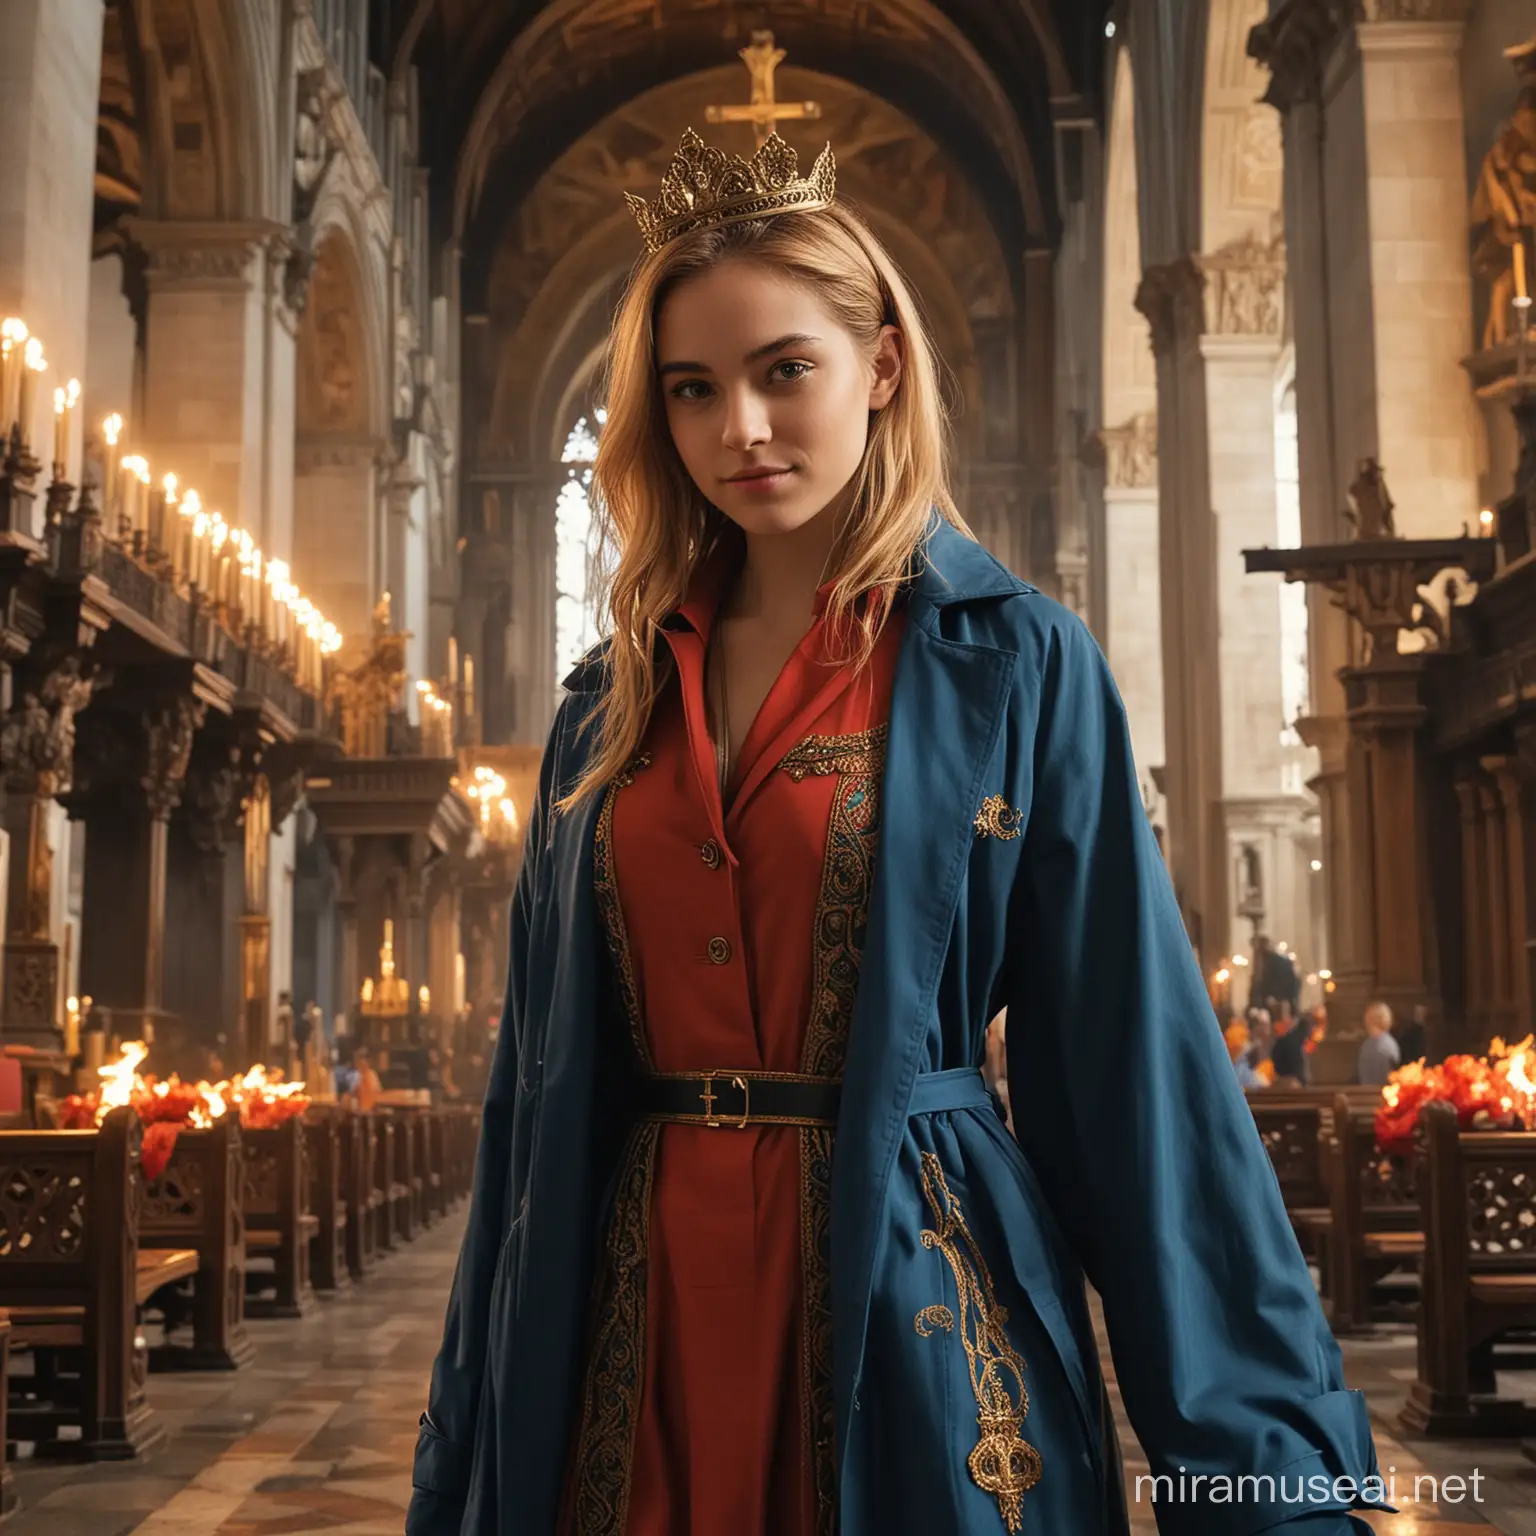 Teenage Empress in Blue Outfit Smirking at Altar in Catholic Church